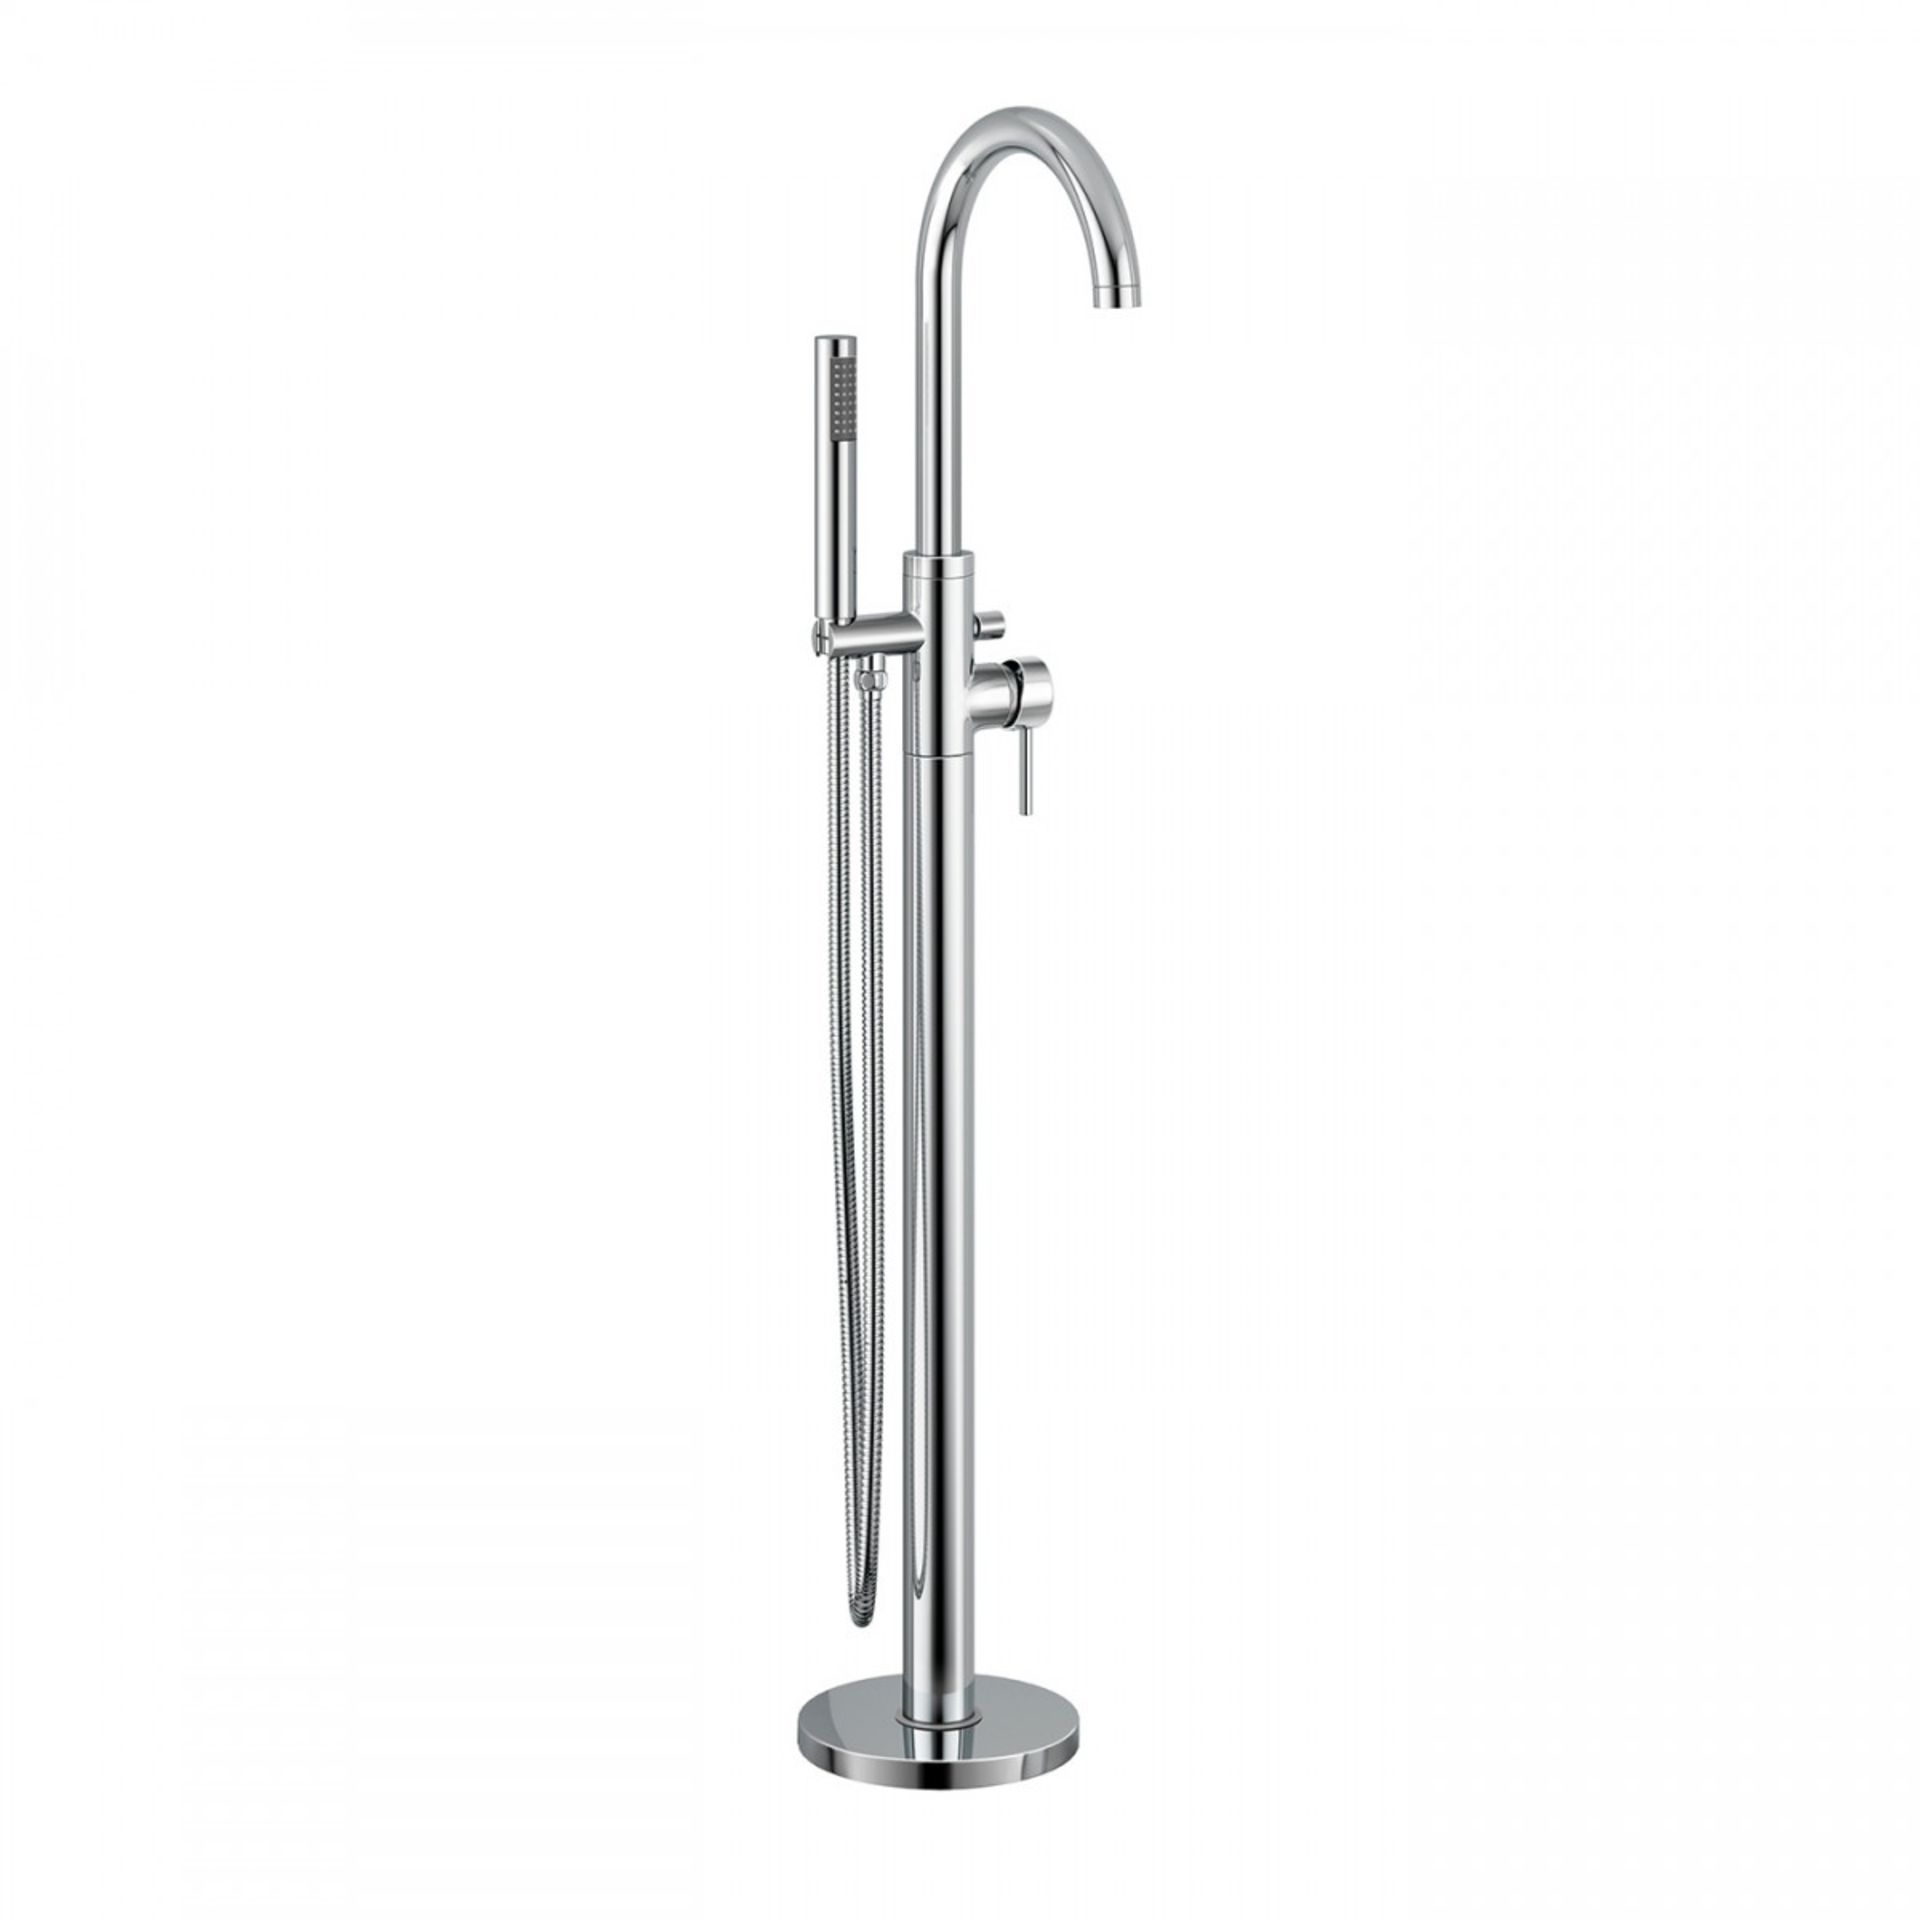 (L14)Gladstone Freestanding Thermostatic Bath Mixer Tap with Hand Held Shower Head. Chrome Plated - Image 2 of 2